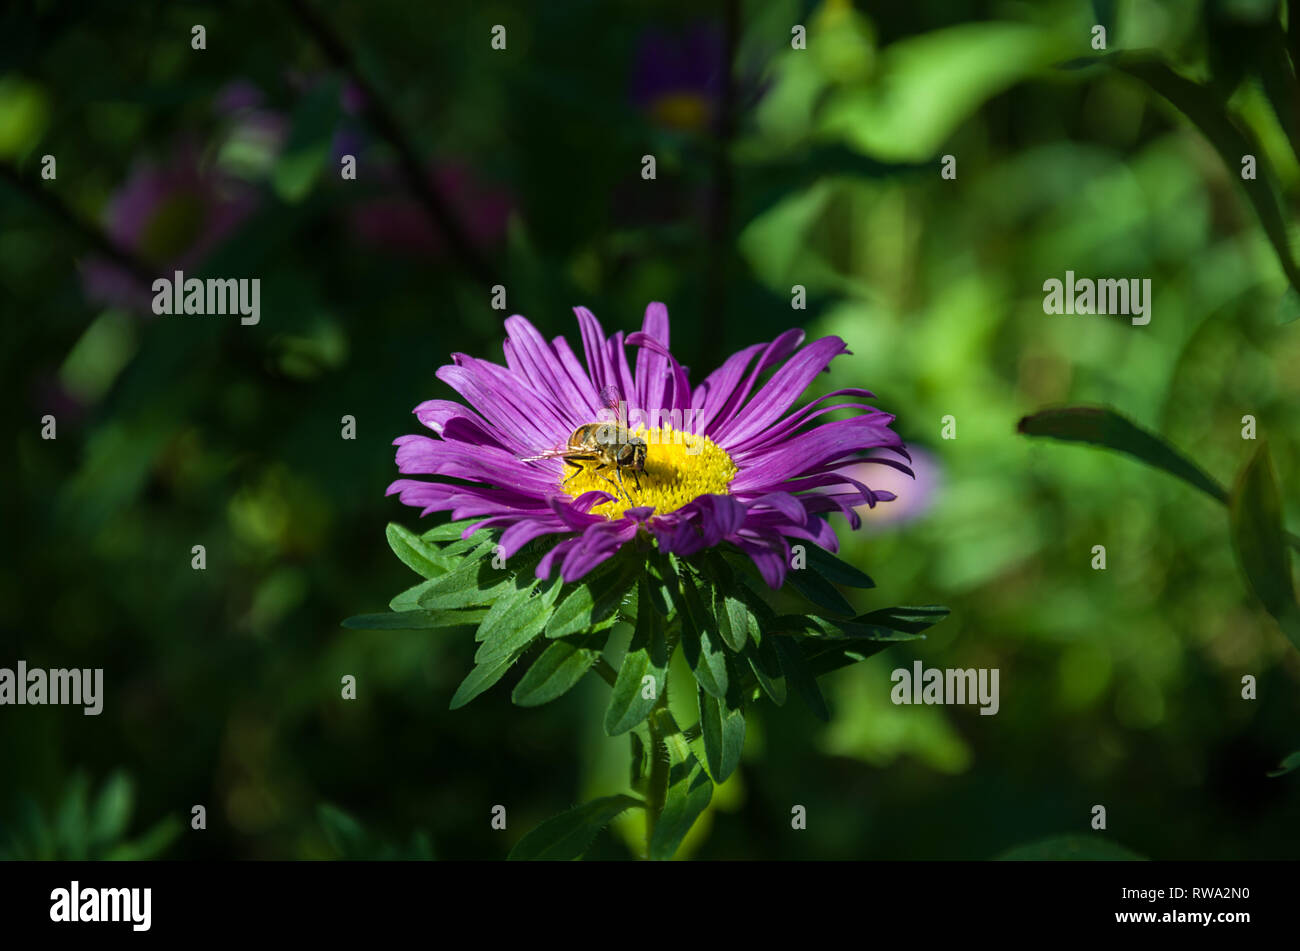 bee on a beautiful flower with beautiful blue aster petals on a green background Stock Photo